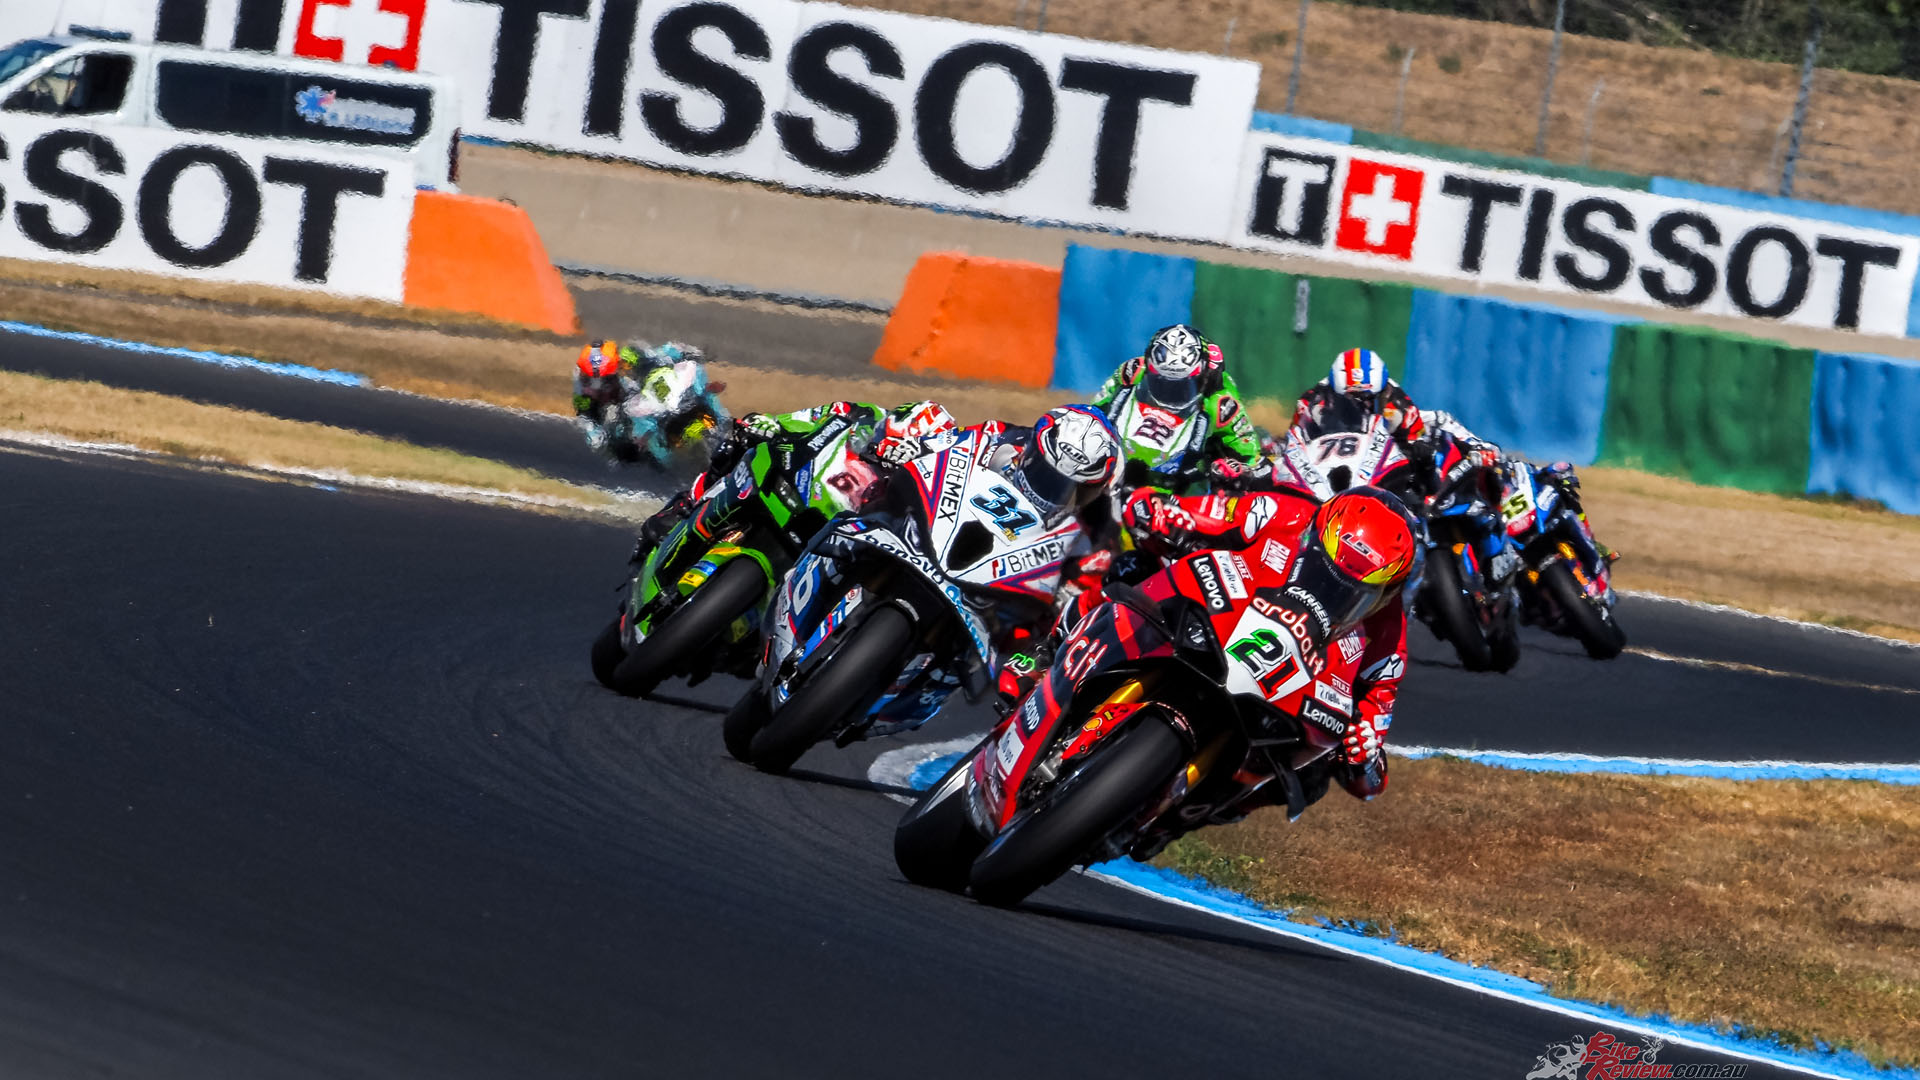 The race was reduced to 20 laps after a technical problem when riders took their positions on the grid following the warm-up lap, with the start delayed by a few minutes and a lap lost from the original race distance.